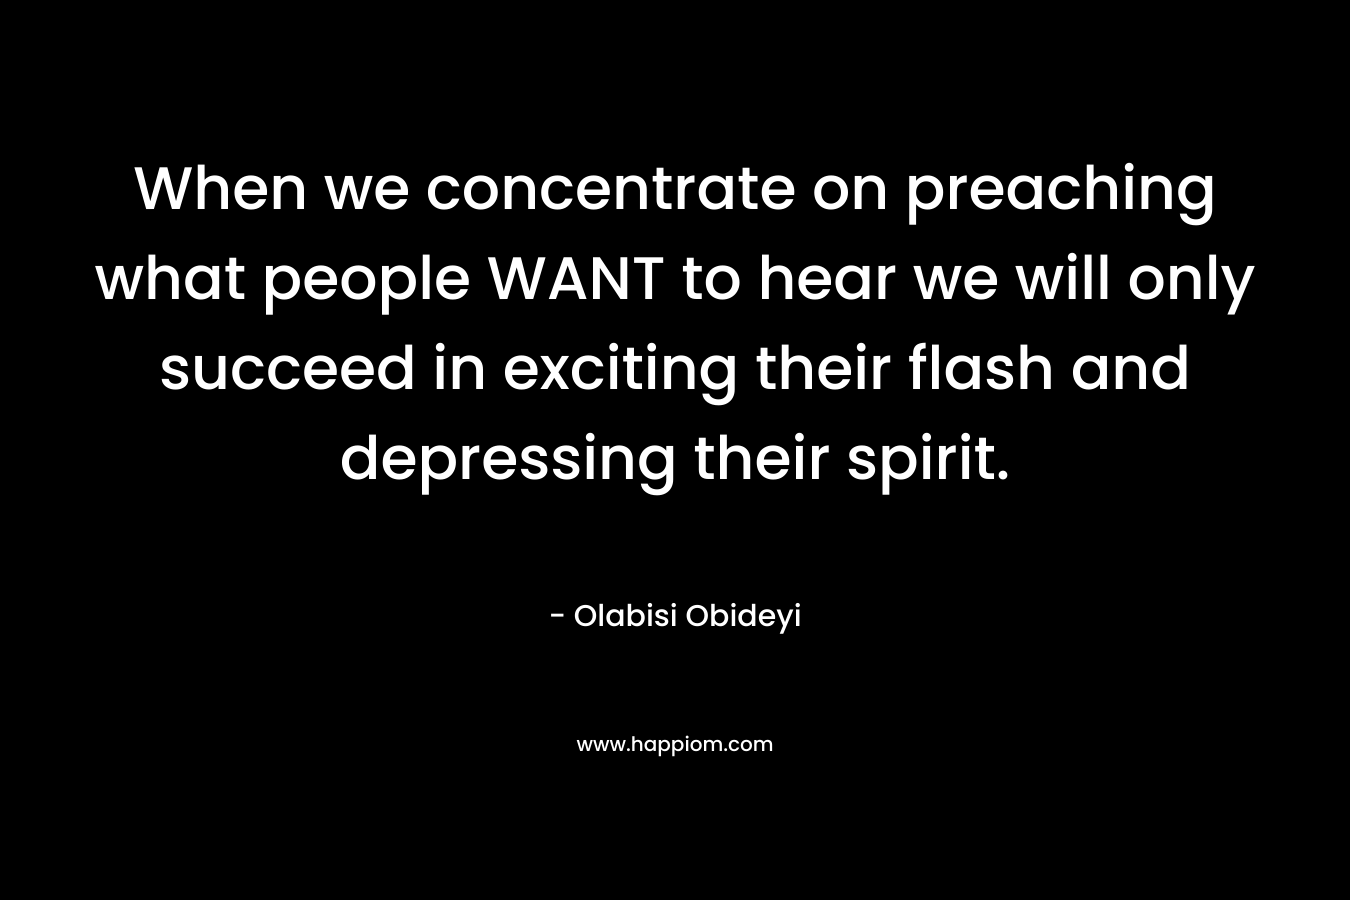 When we concentrate on preaching what people WANT to hear we will only succeed in exciting their flash and depressing their spirit. – Olabisi Obideyi